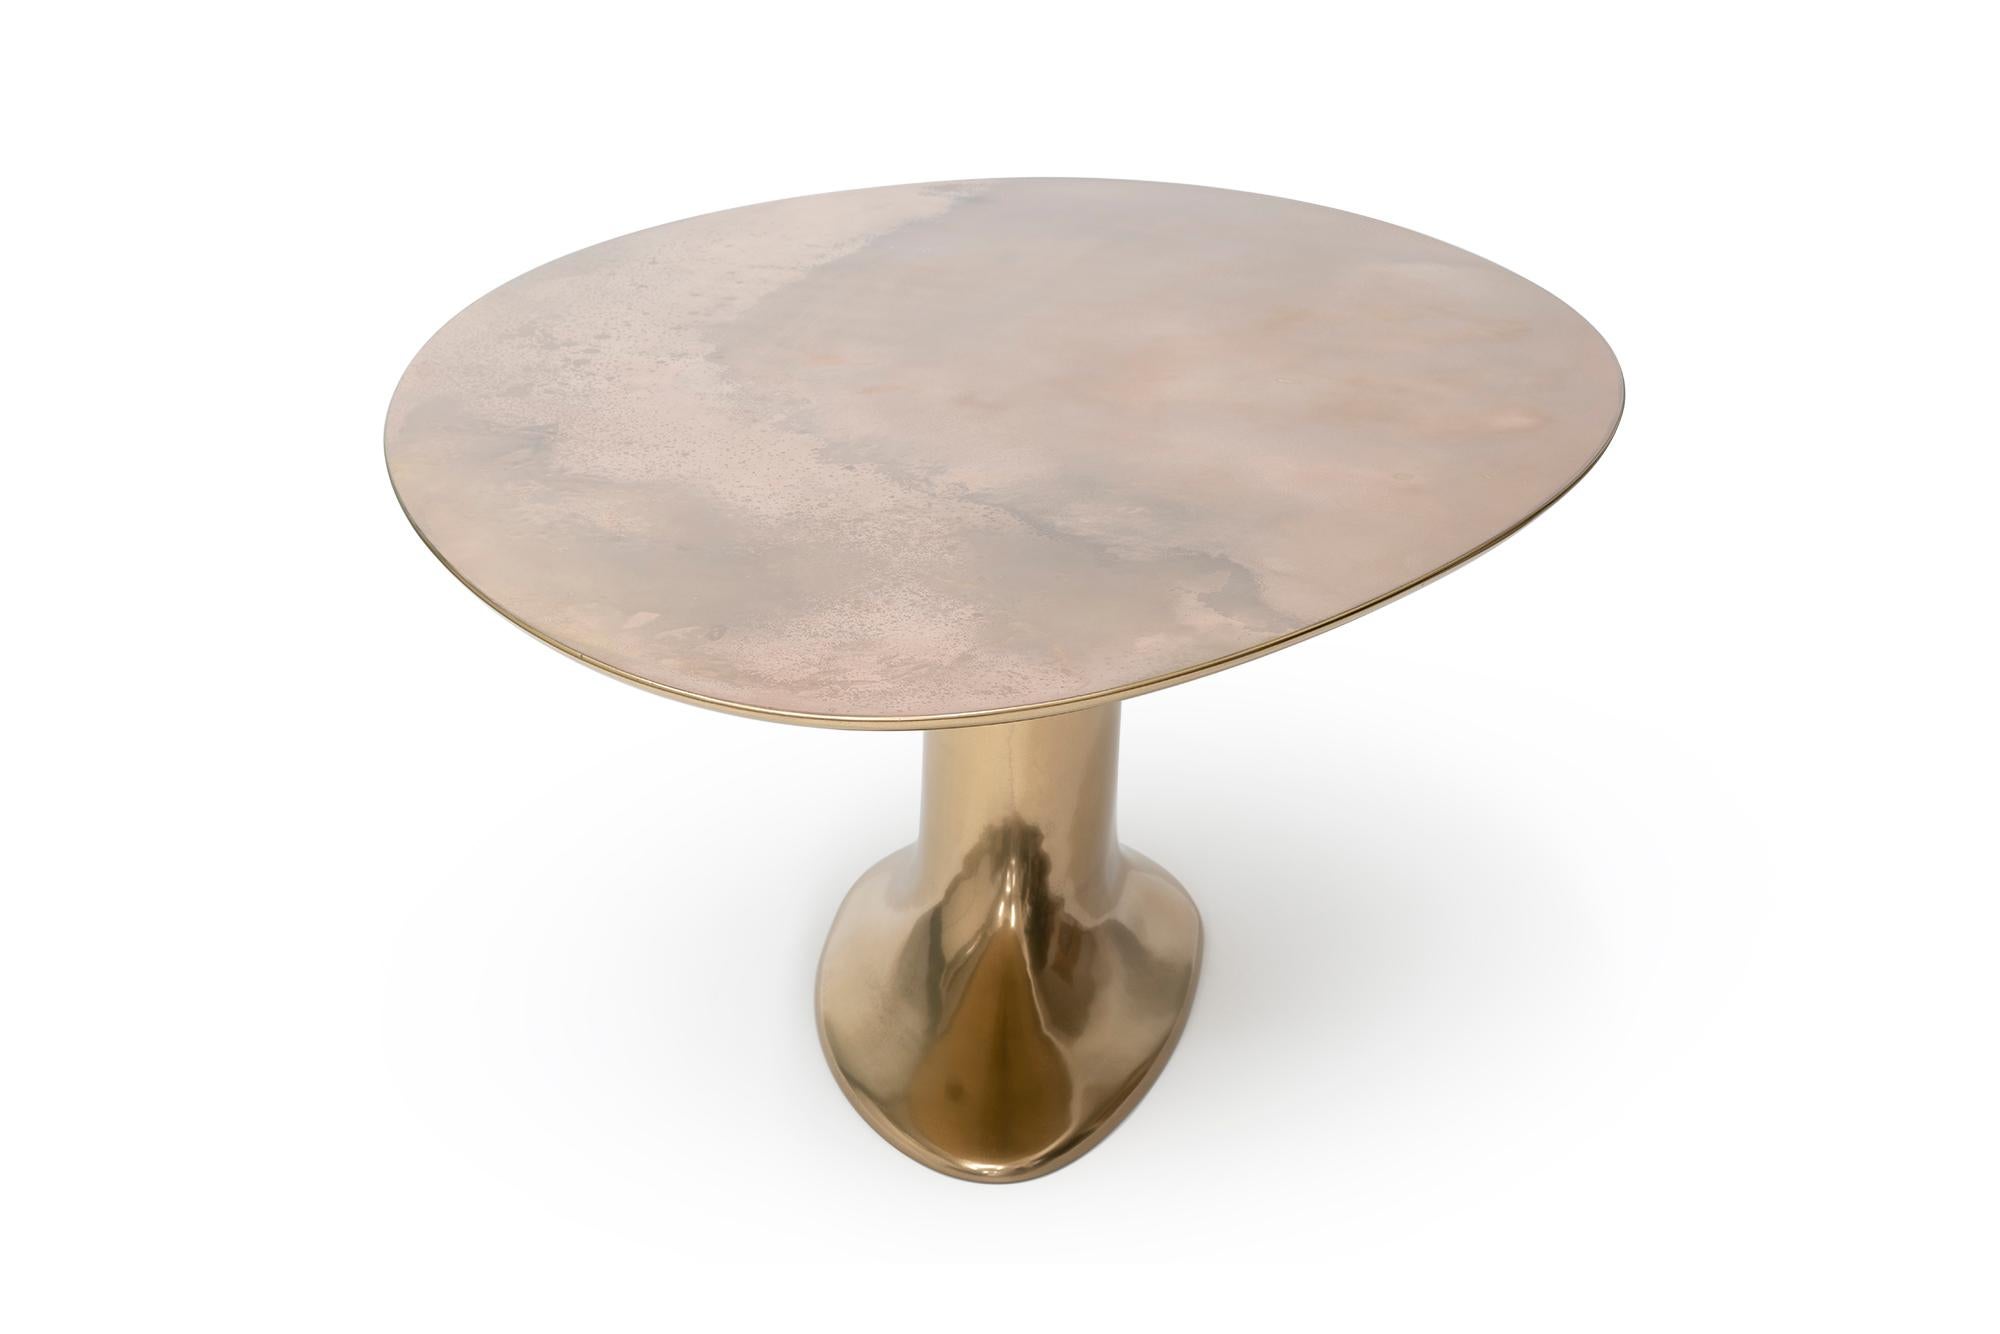 Messier 104 - 21st century sculptured oval bronzed dining table.

Materials: wooden body/fiberglass/liquid metal
Top: Liquid metal, multiple layers of lacquer; bronze, copper and brass pigment powder
Finish: super hydrophobic crystal clear